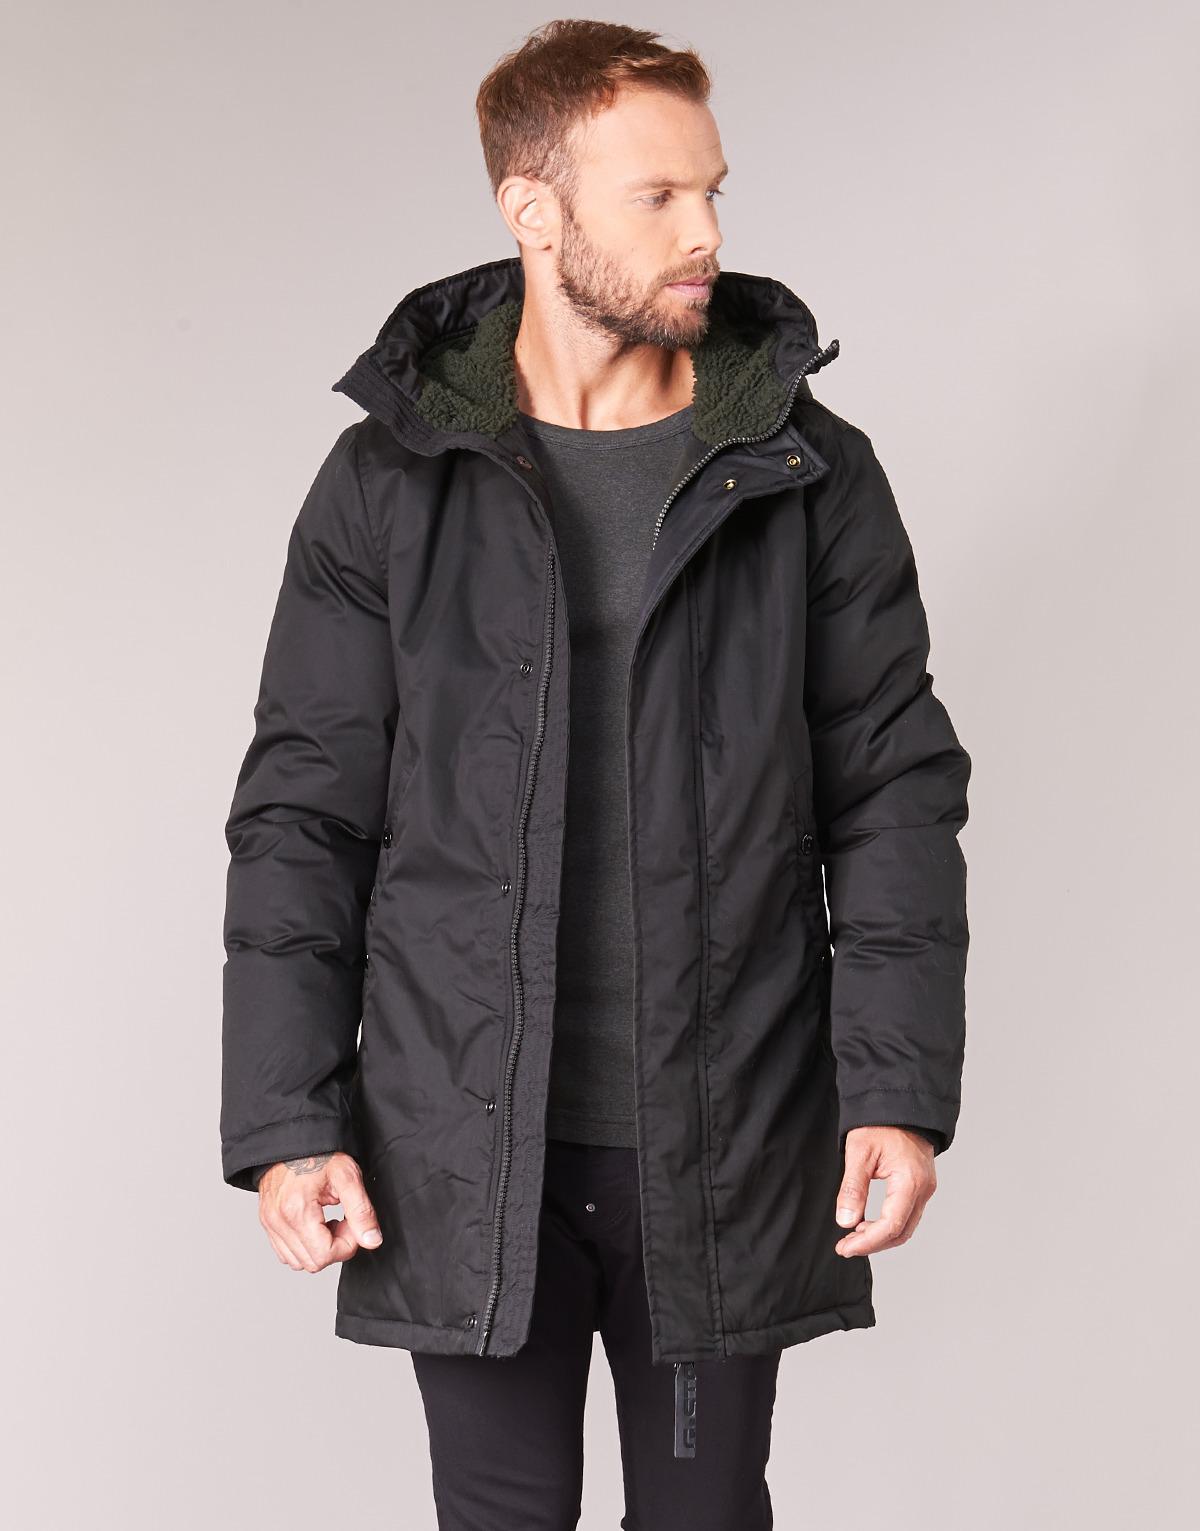 G Star Whistler Strett Sherpa Hdd Parka, Buy Now, Online, 51% OFF,  playgrowned.com